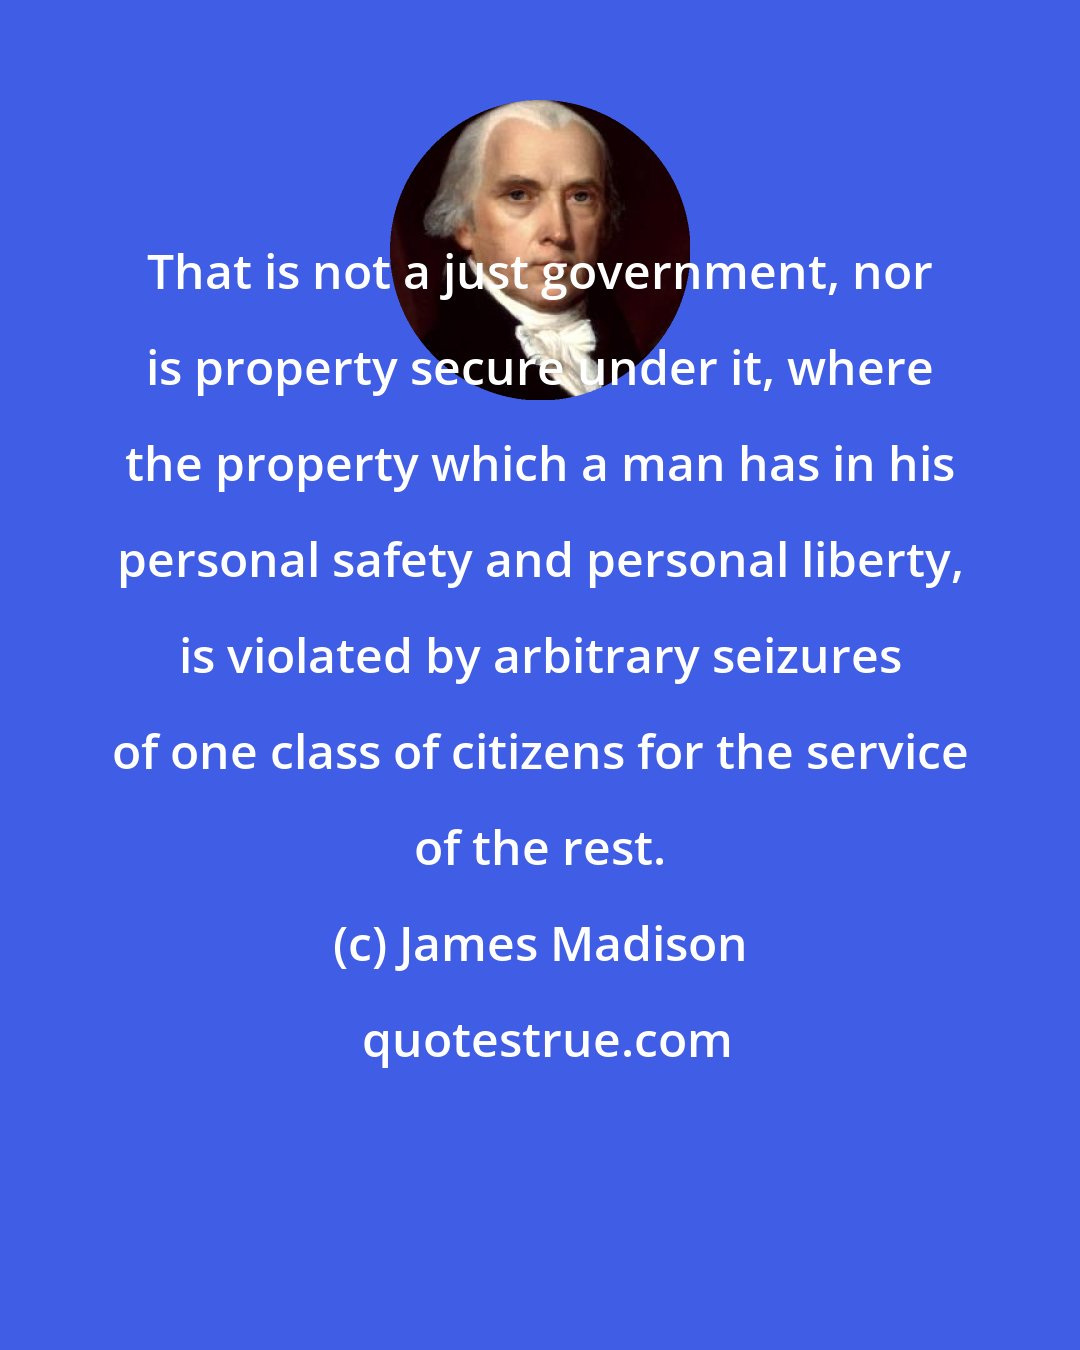 James Madison: That is not a just government, nor is property secure under it, where the property which a man has in his personal safety and personal liberty, is violated by arbitrary seizures of one class of citizens for the service of the rest.